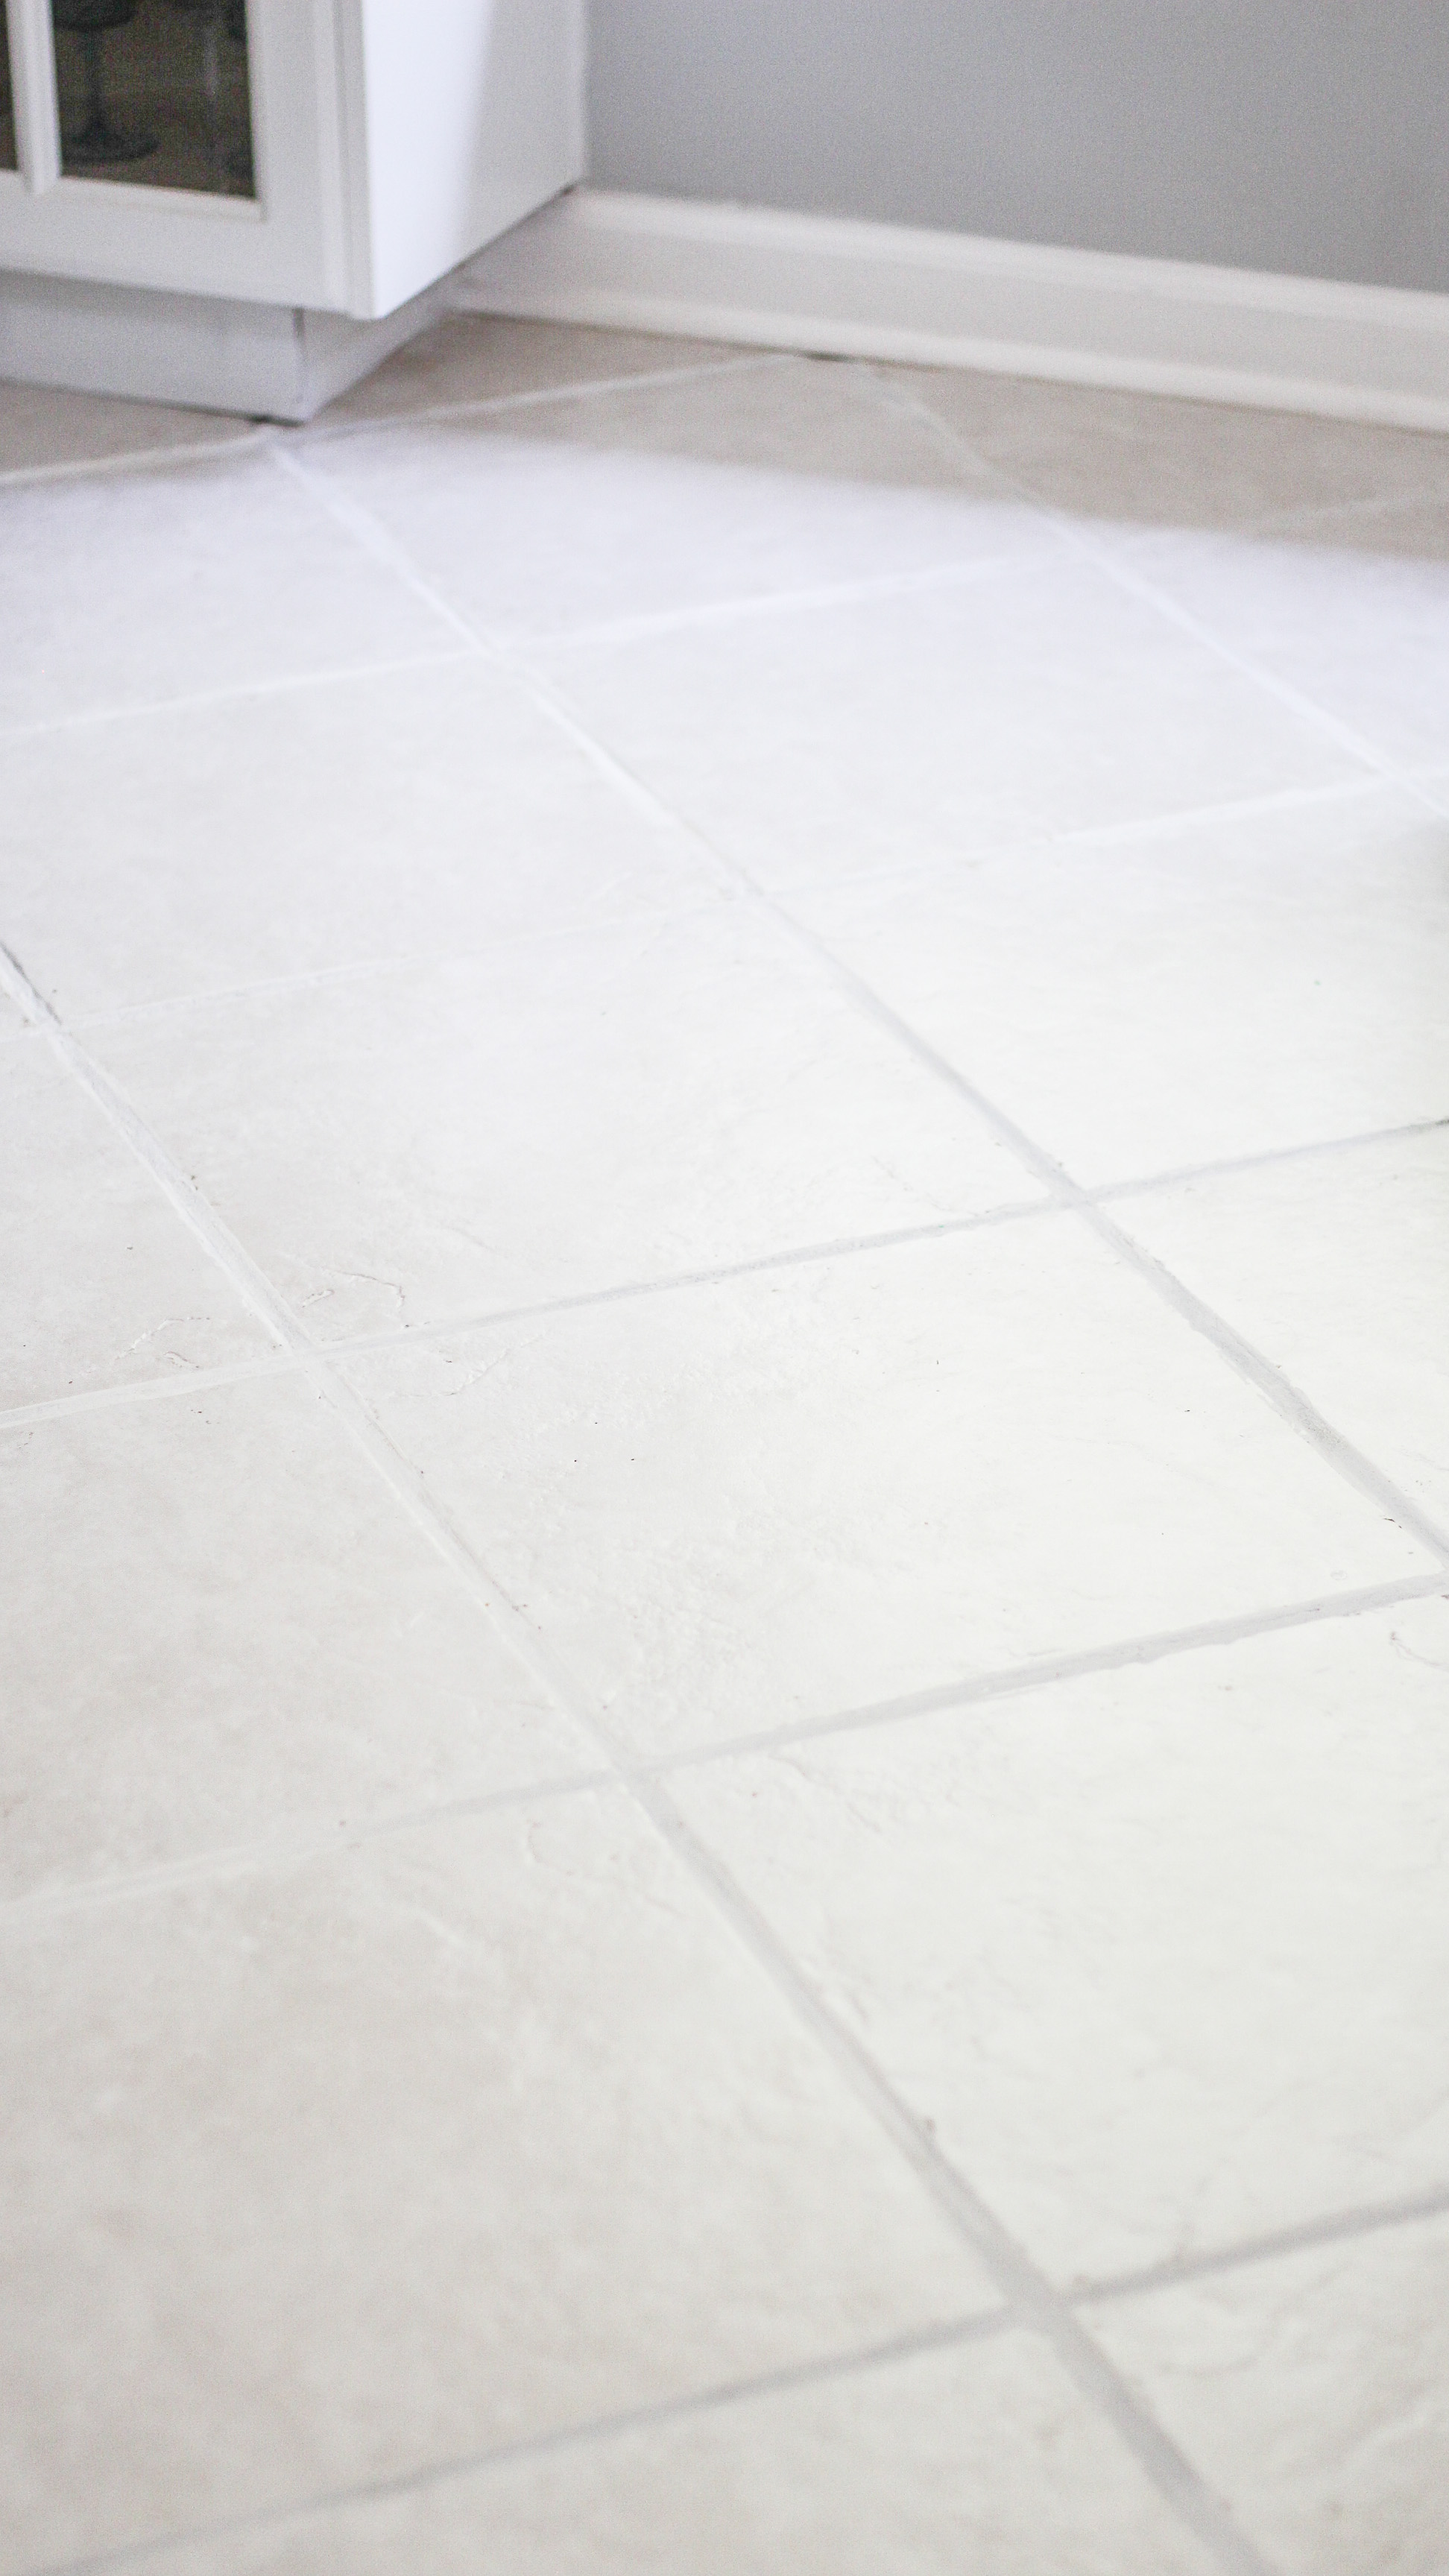 Neglected Tile Flooring, What To Use Clean Vinyl Tile Floors With Grout